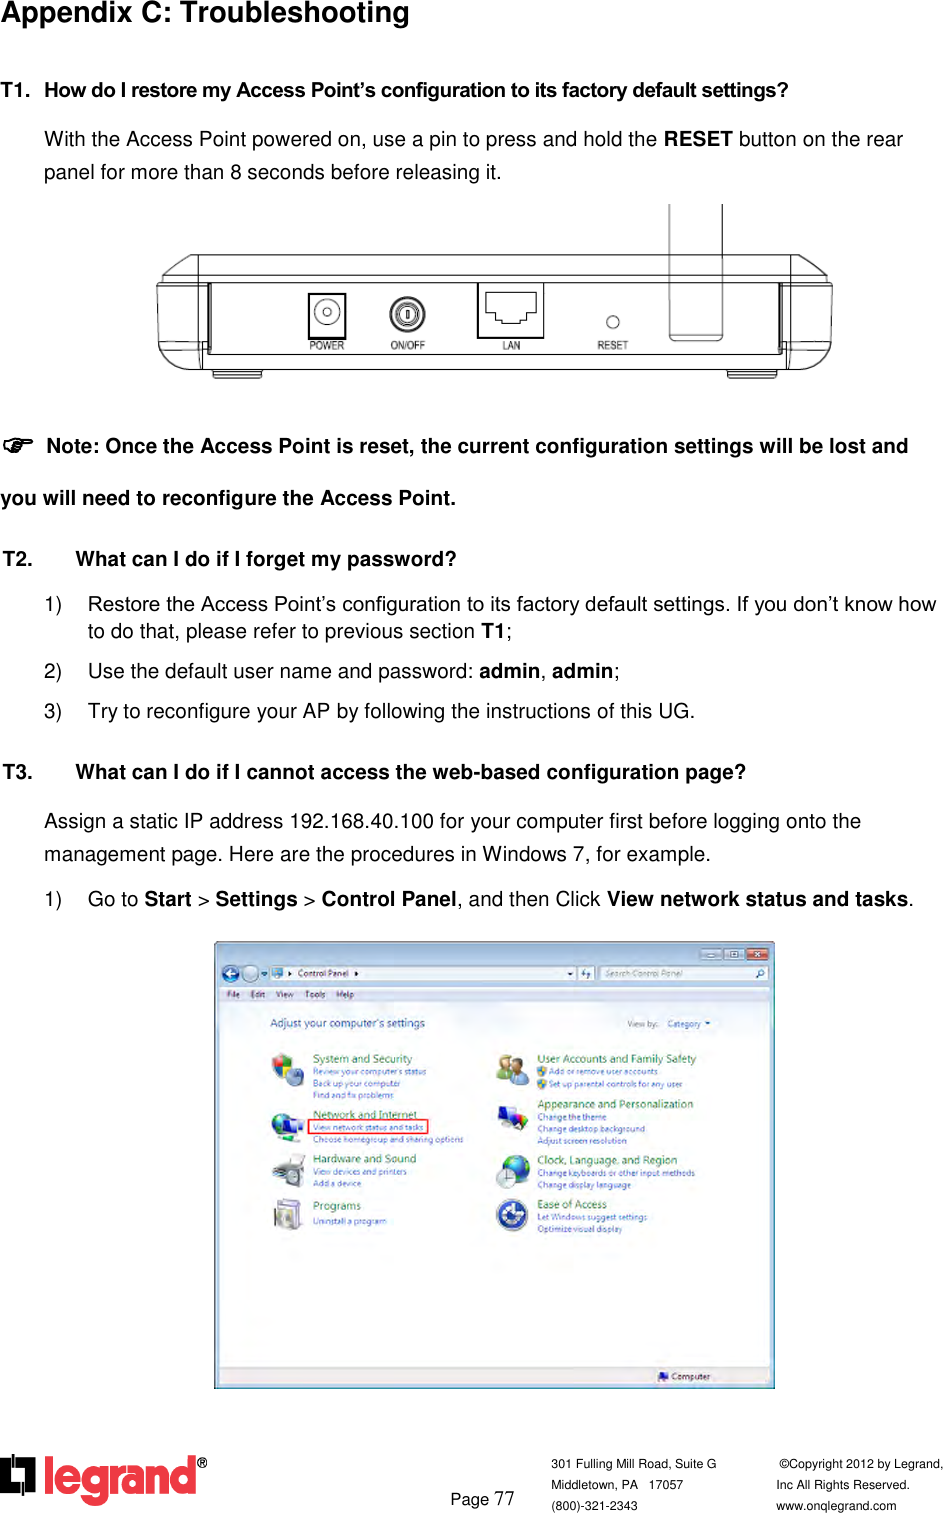         Page 77  301 Fulling Mill Road, Suite G            ©Copyright 2012 by Legrand,  Middletown, PA   17057               Inc All Rights Reserved. (800)-321-2343    www.onqlegrand.com              Appendix C: Troubleshooting T1.  How do I restore my Access Point’s configuration to its factory default settings? With the Access Point powered on, use a pin to press and hold the RESET button on the rear panel for more than 8 seconds before releasing it.   Note: Once the Access Point is reset, the current configuration settings will be lost and you will need to reconfigure the Access Point. T2.  What can I do if I forget my password? 1) Restore the Access Point’s configuration to its factory default settings. If you don’t know how to do that, please refer to previous section T1; 2)  Use the default user name and password: admin, admin; 3)  Try to reconfigure your AP by following the instructions of this UG. T3.  What can I do if I cannot access the web-based configuration page? Assign a static IP address 192.168.40.100 for your computer first before logging onto the management page. Here are the procedures in Windows 7, for example. 1)  Go to Start &gt; Settings &gt; Control Panel, and then Click View network status and tasks.   